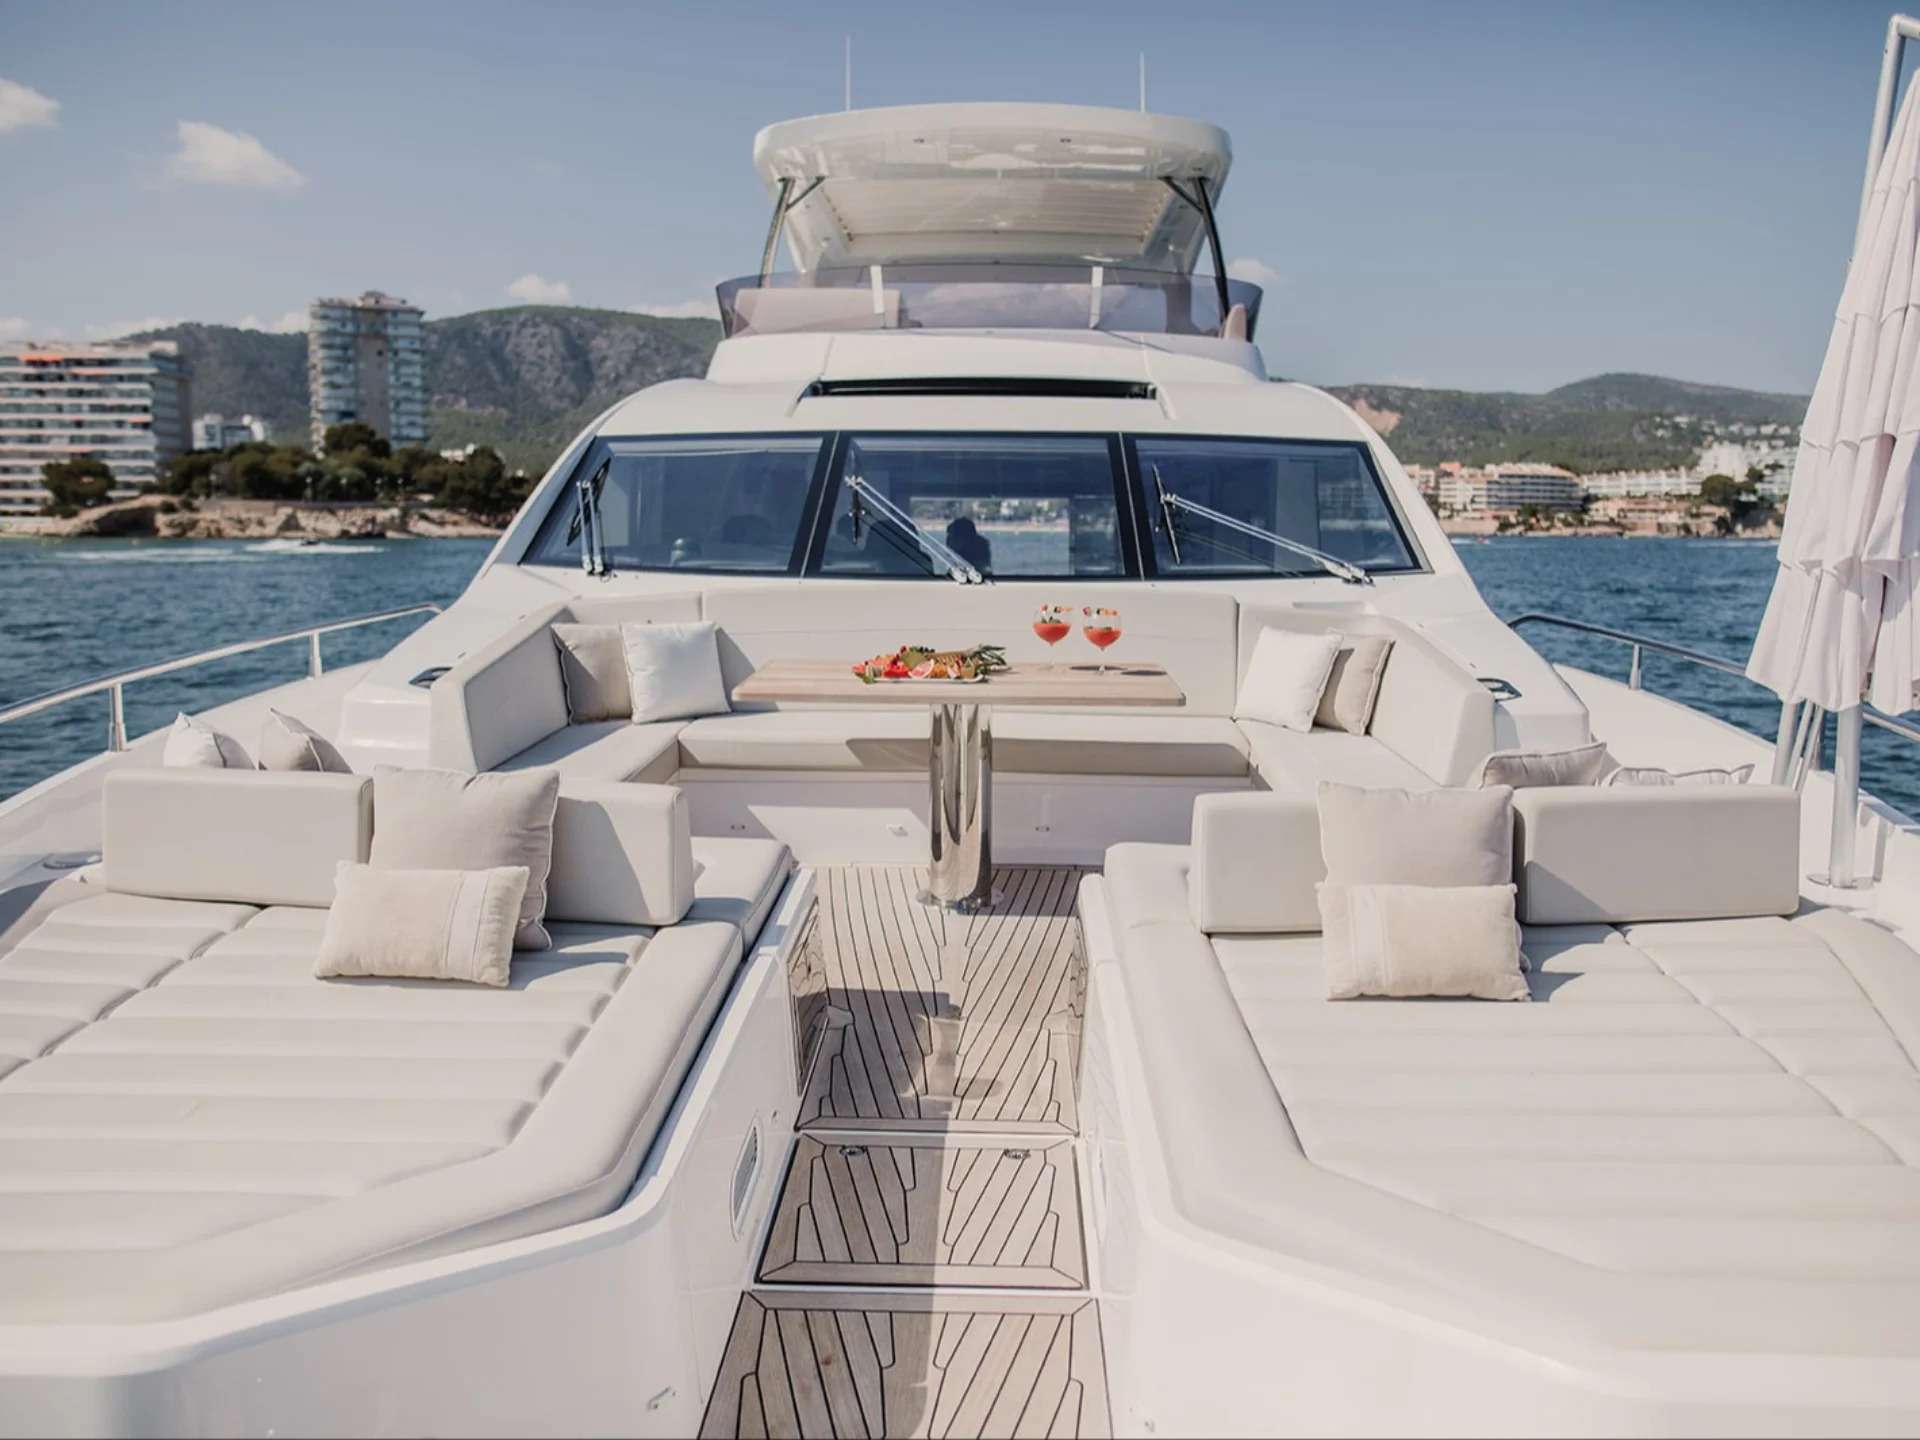 LADY M - Yacht Charter Menorca & Boat hire in W. Med -Naples/Sicily, W. Med -Riviera/Cors/Sard., W. Med - Spain/Balearics 4